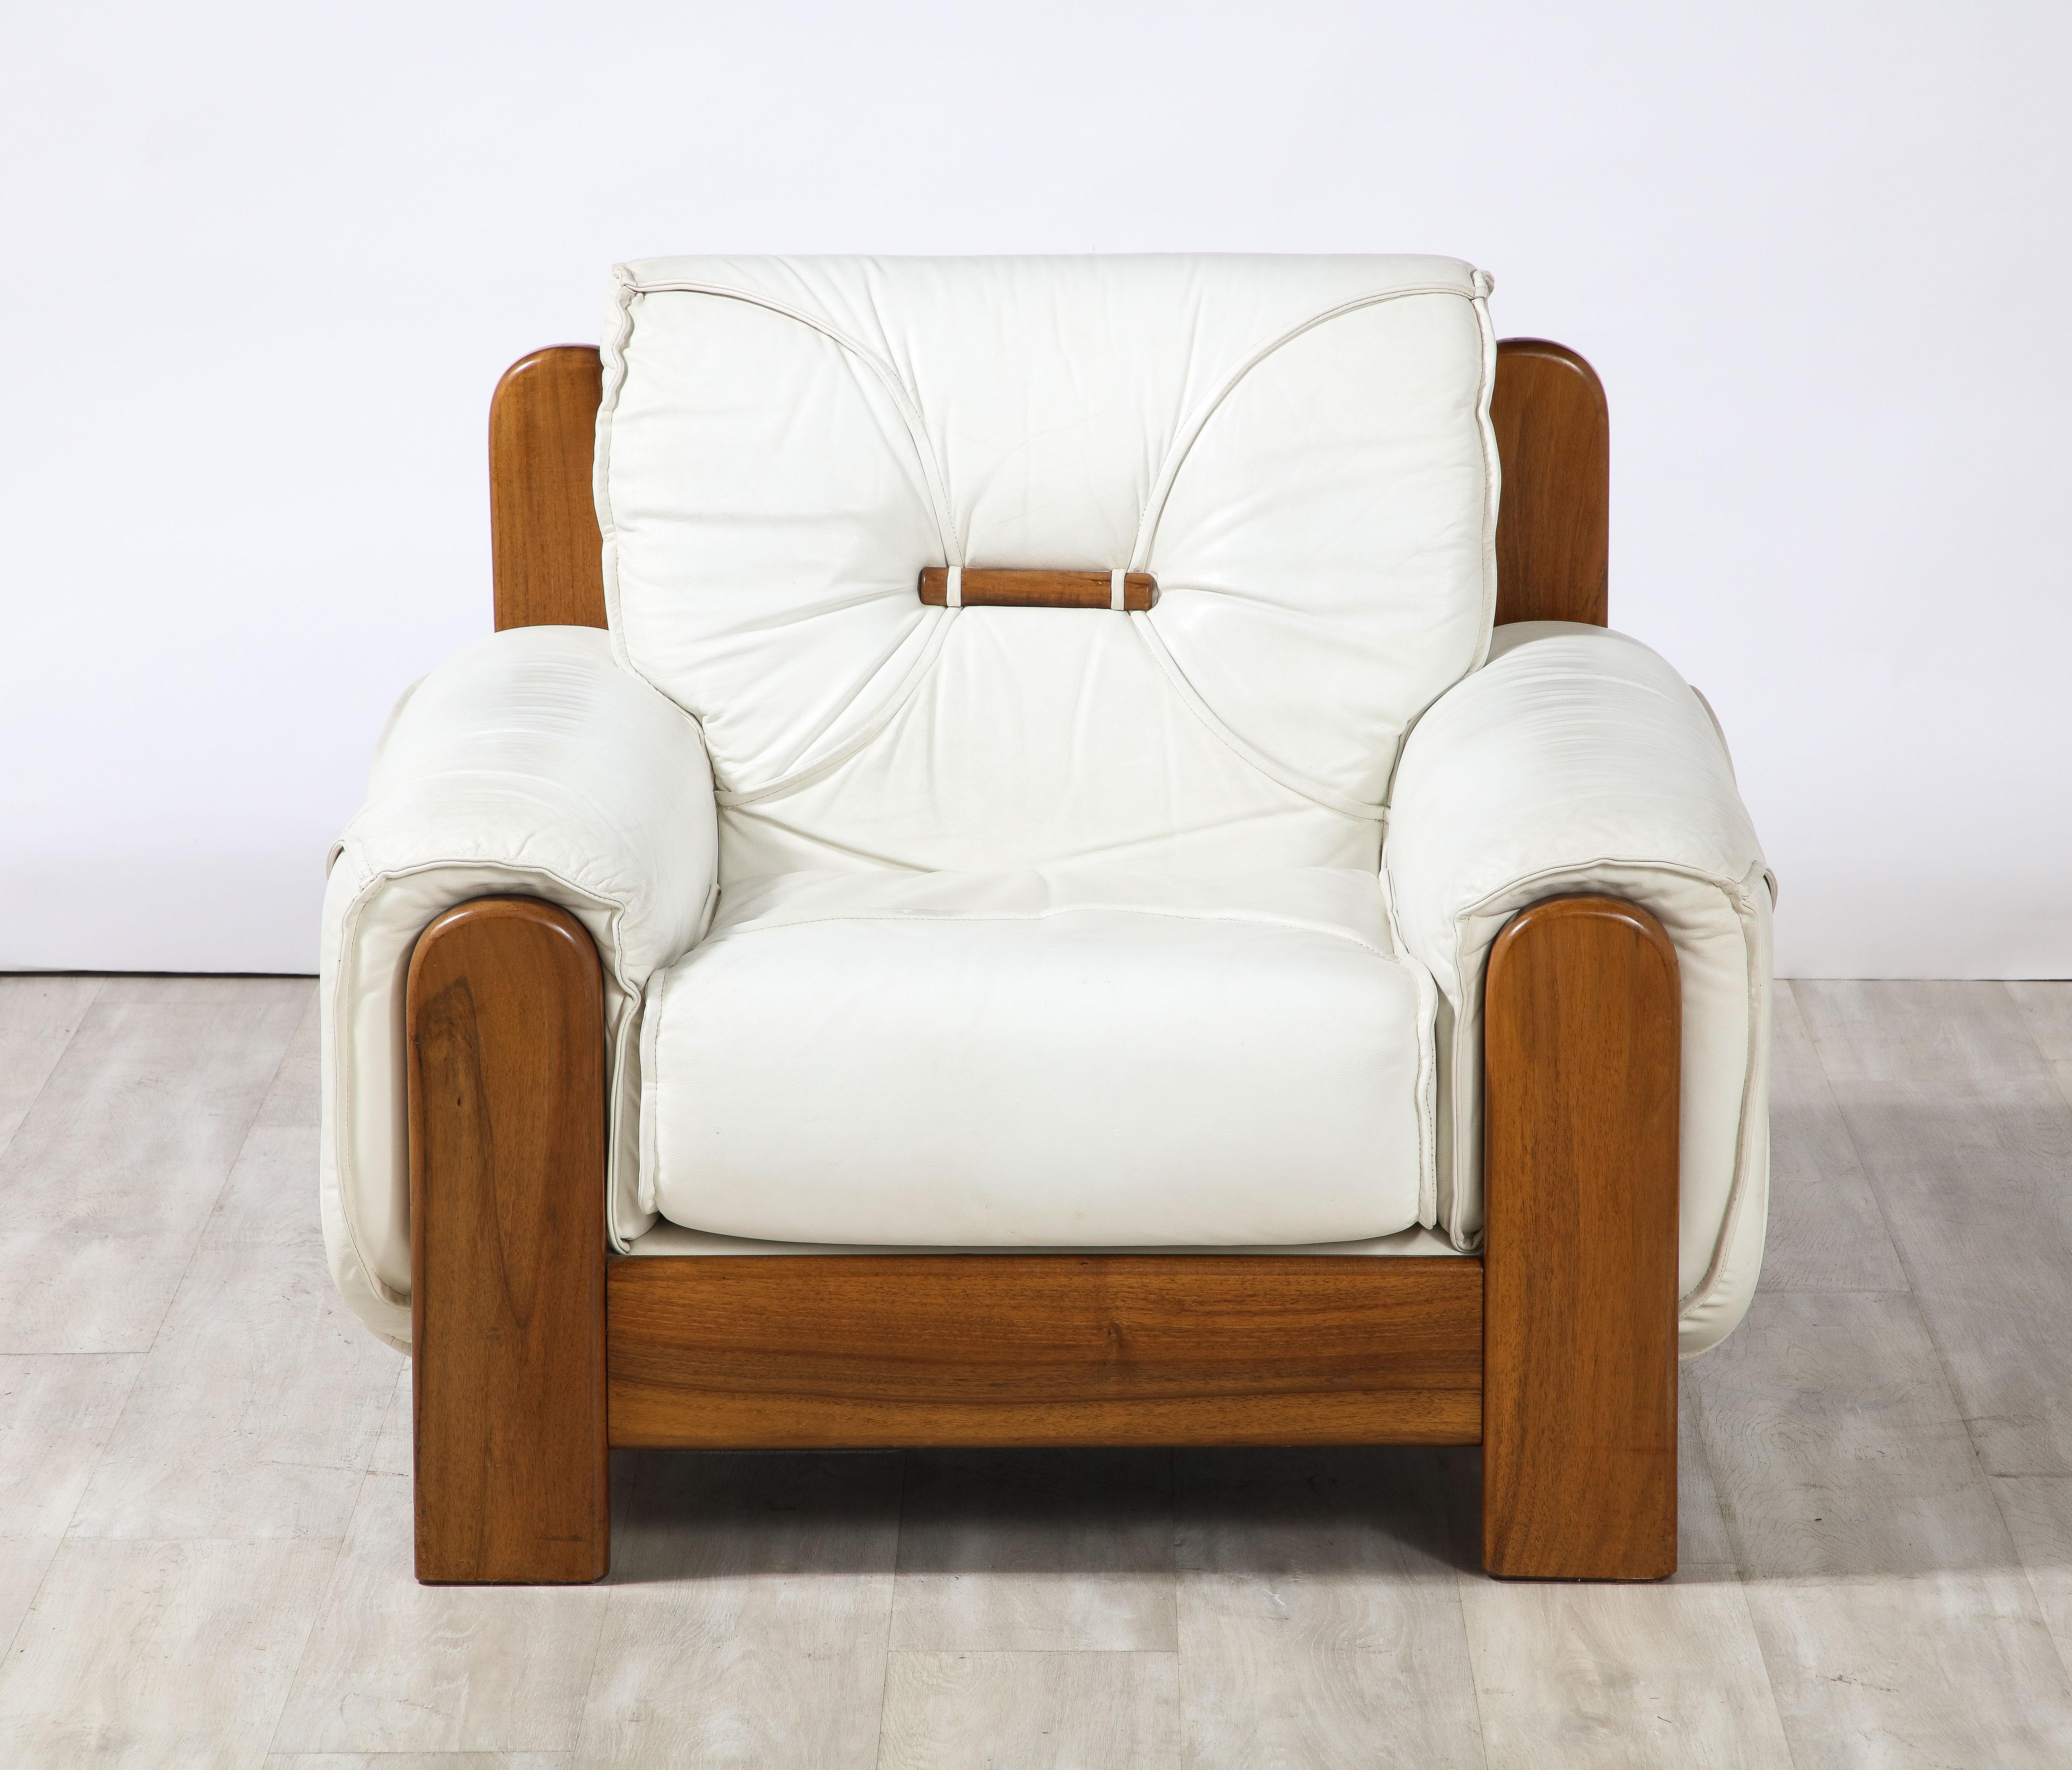 Pair of Italian 1970's Walnut and White Leather Lounge Chairs For Sale 1